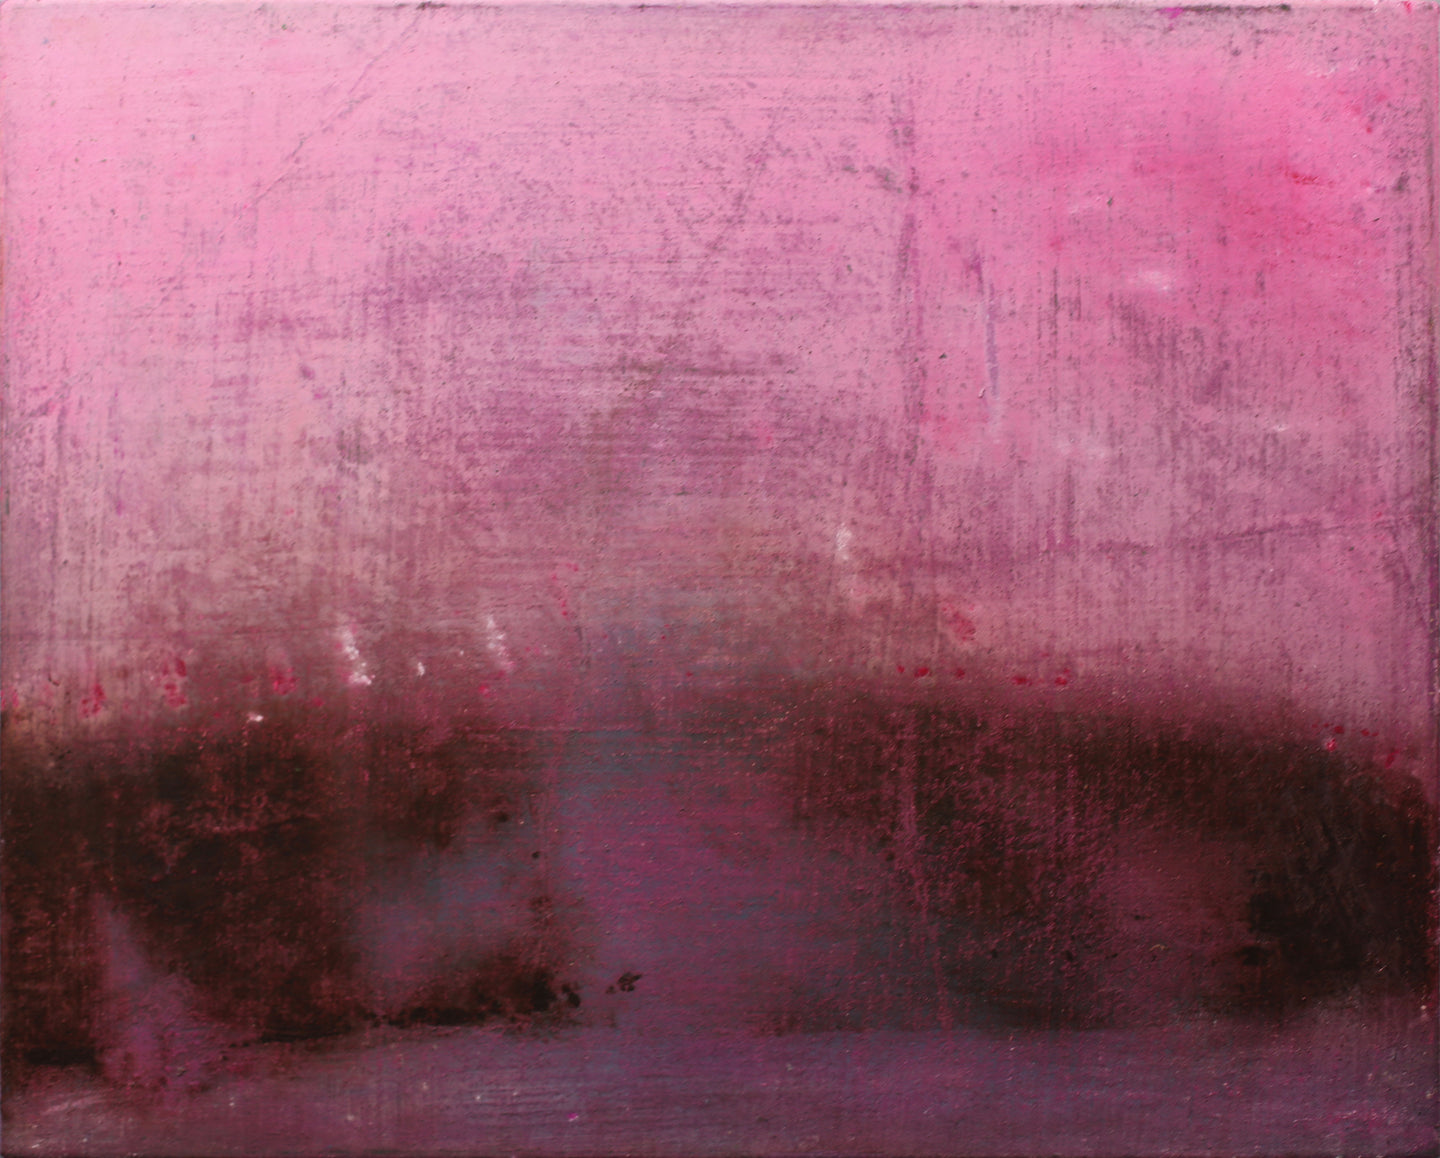 Maite Nobo's pink and black abstract painting, 